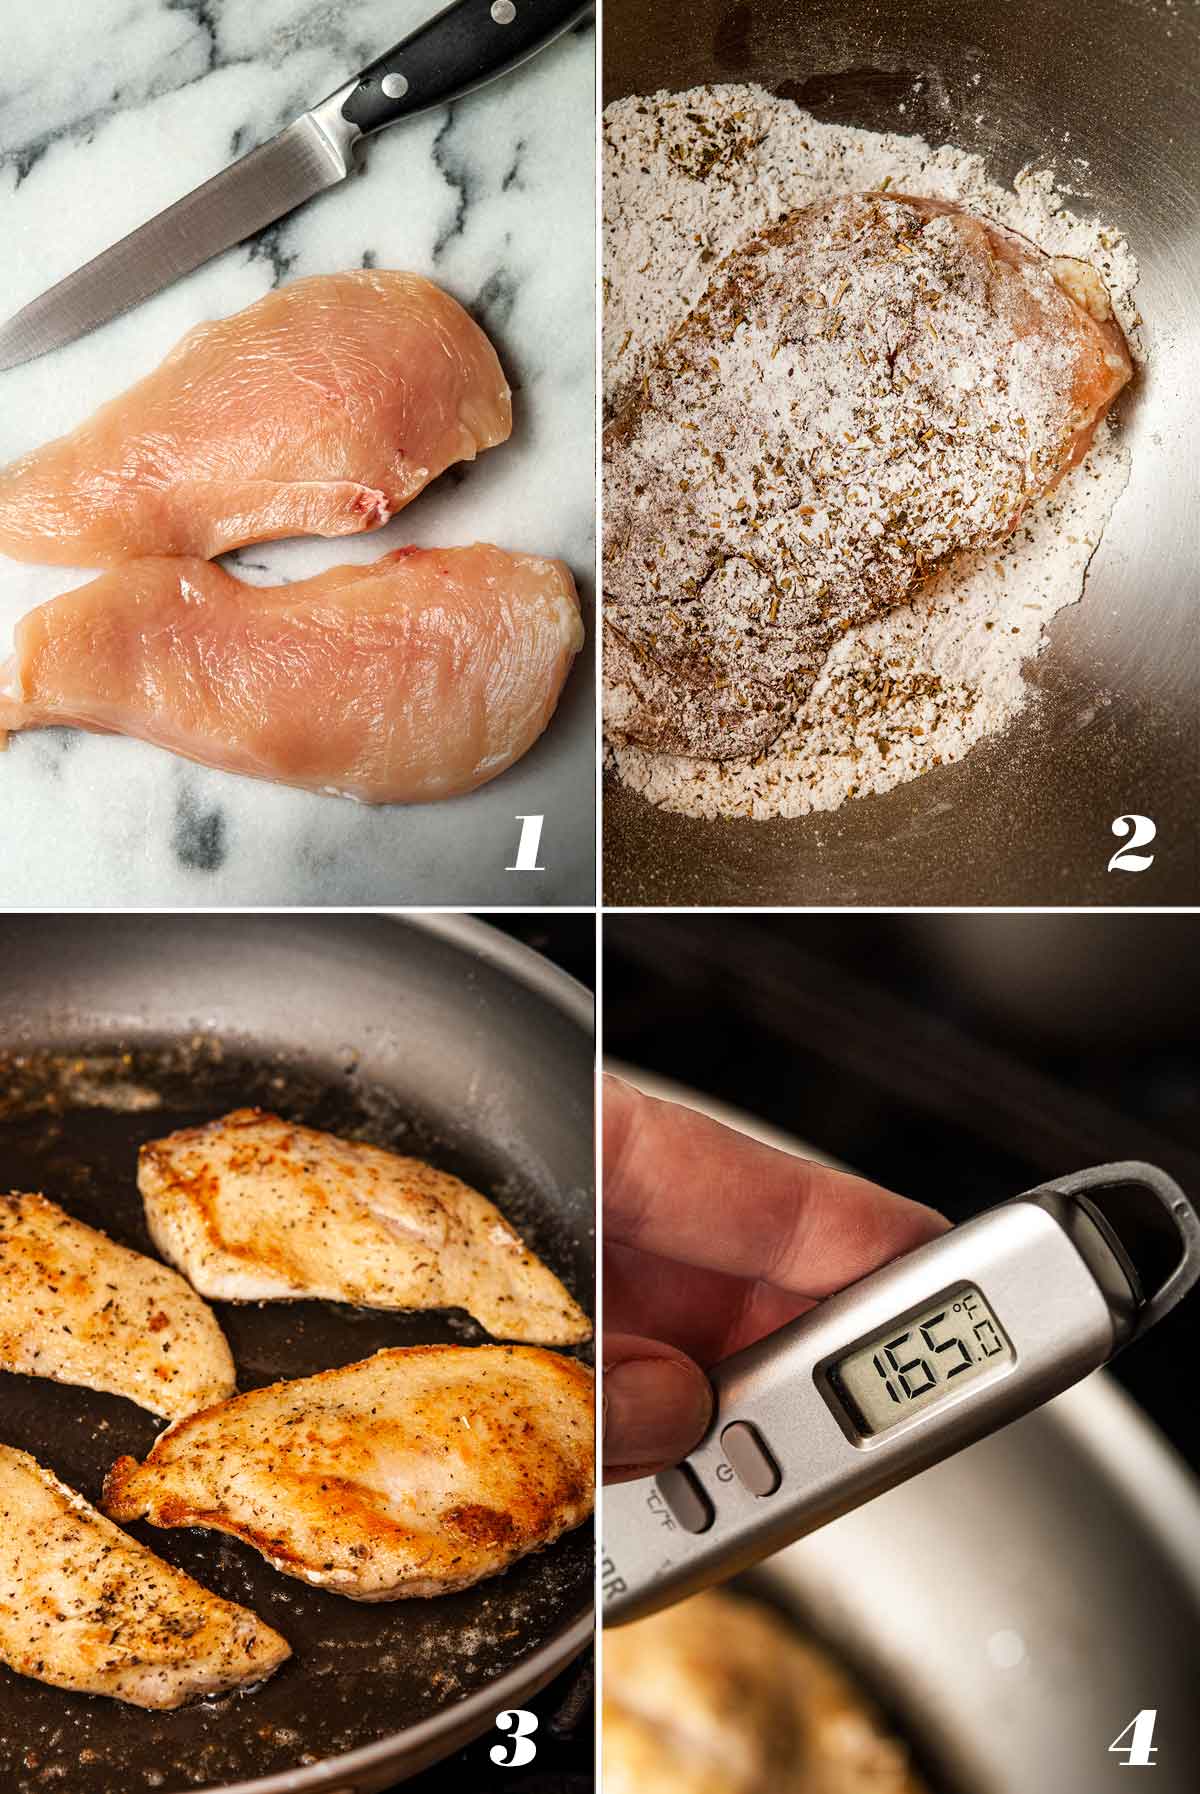 A collage of 4 numbered images showing how to make chicken with Herbs de Provence